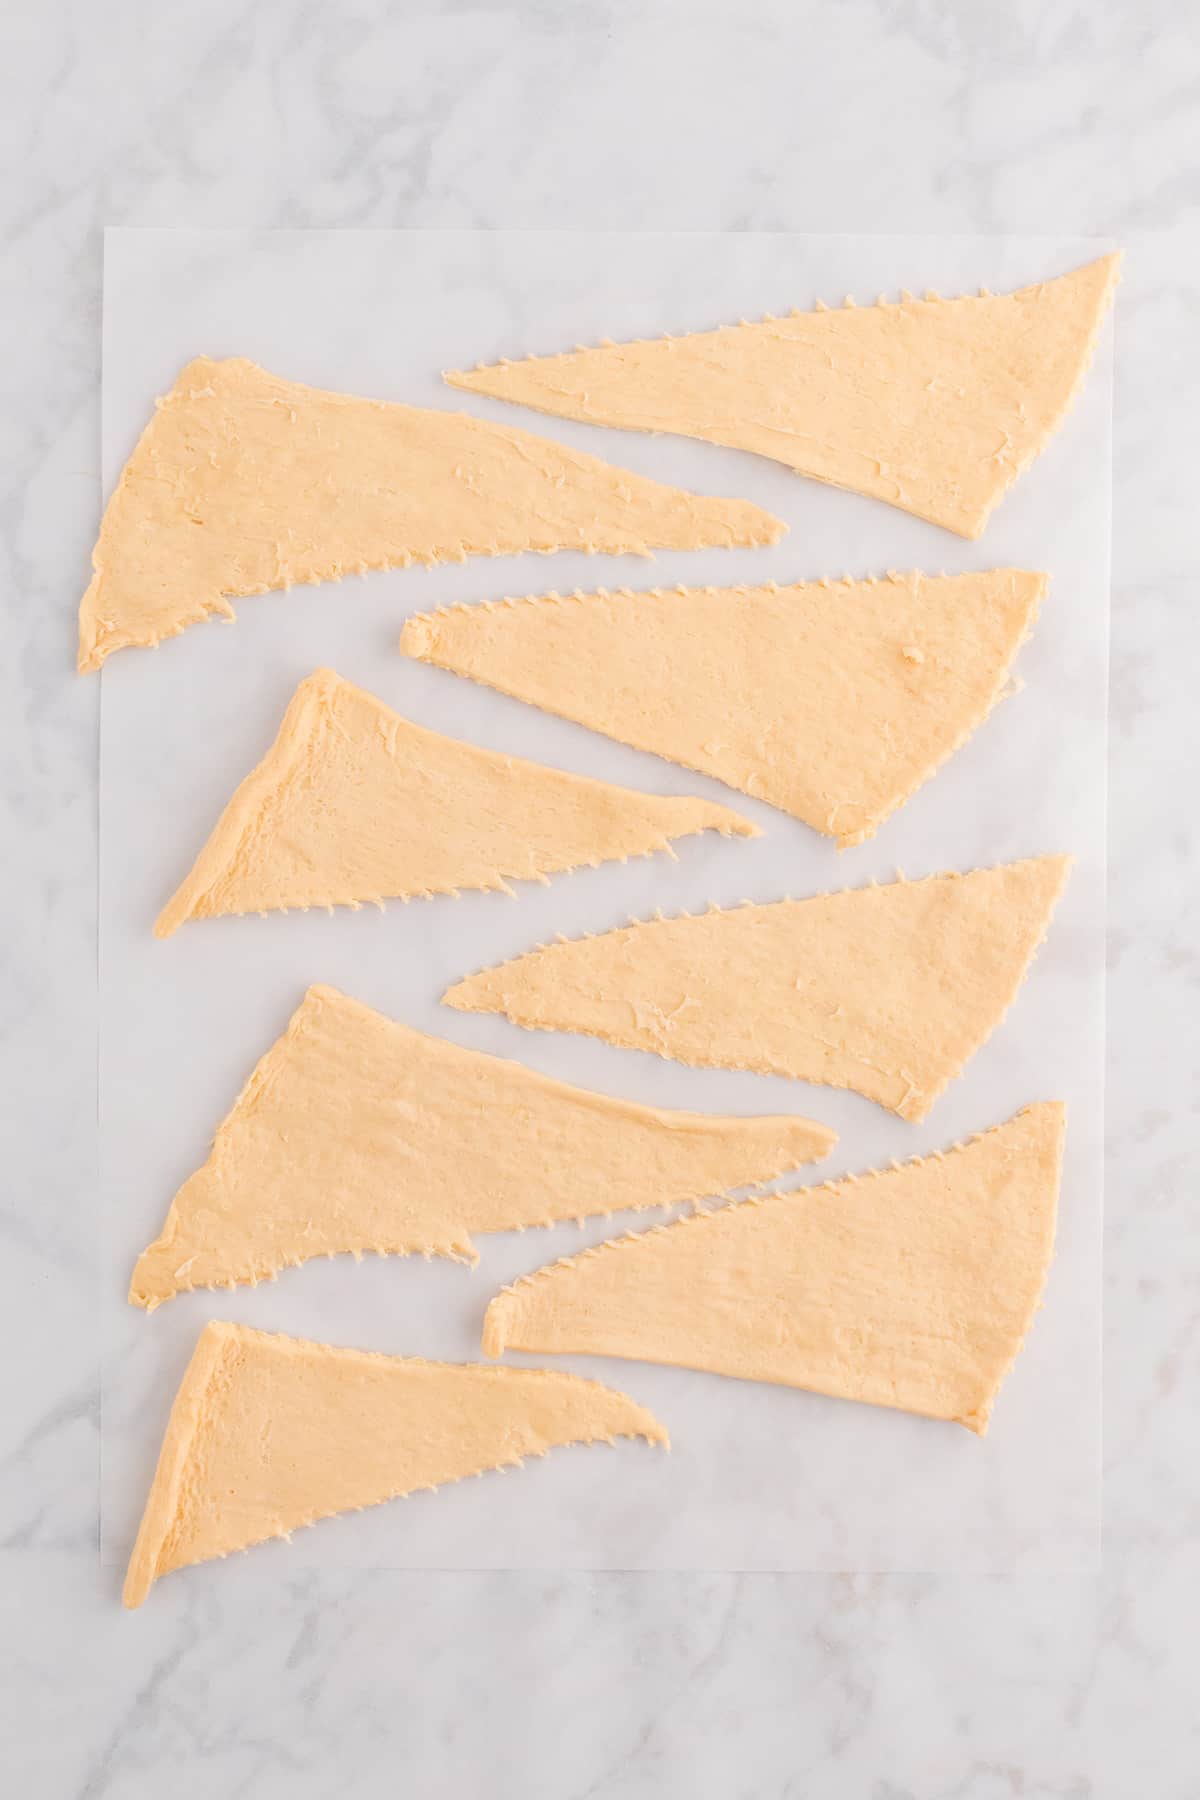 Crescent dough separated into triangles.